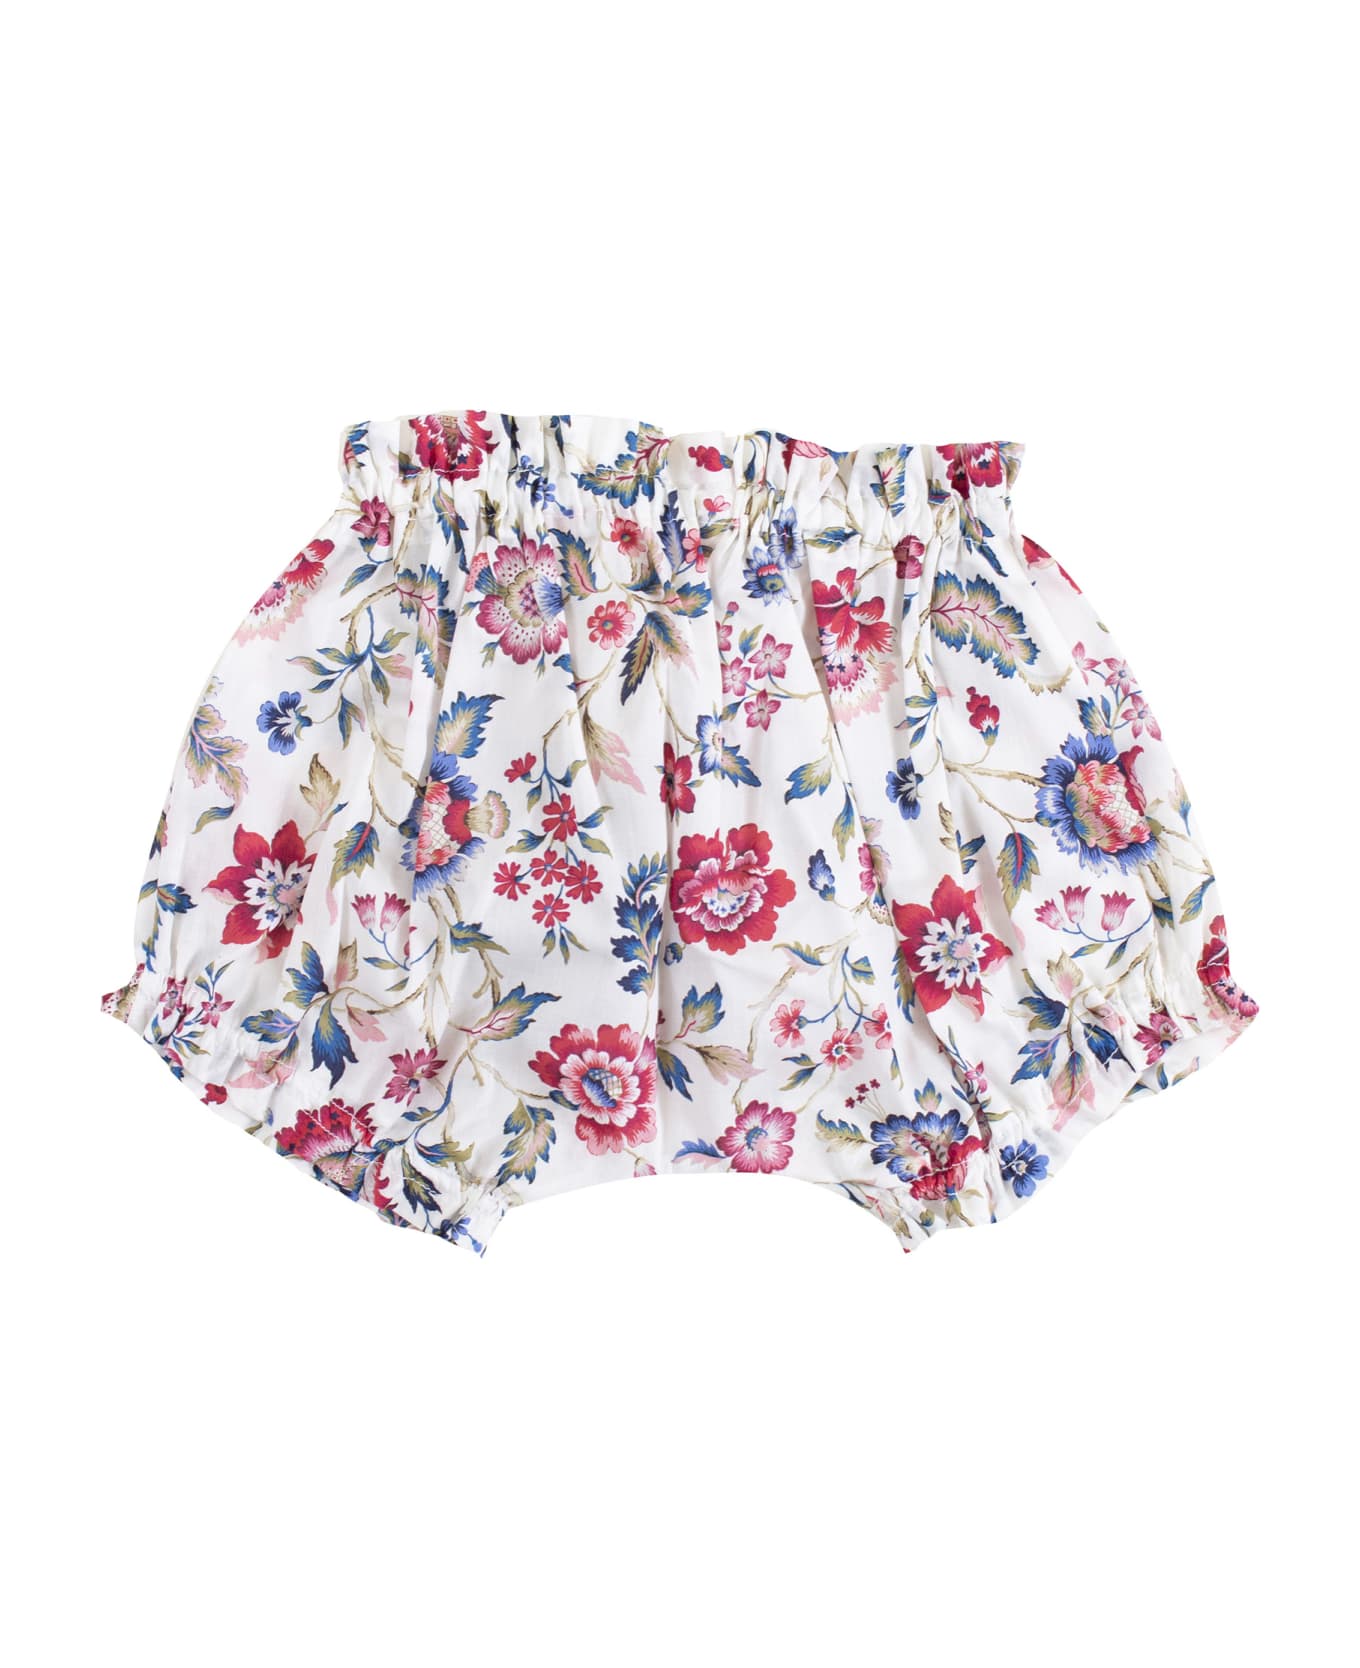 Zhoe & Tobiah Flowered Newborn Coulotte - Pink